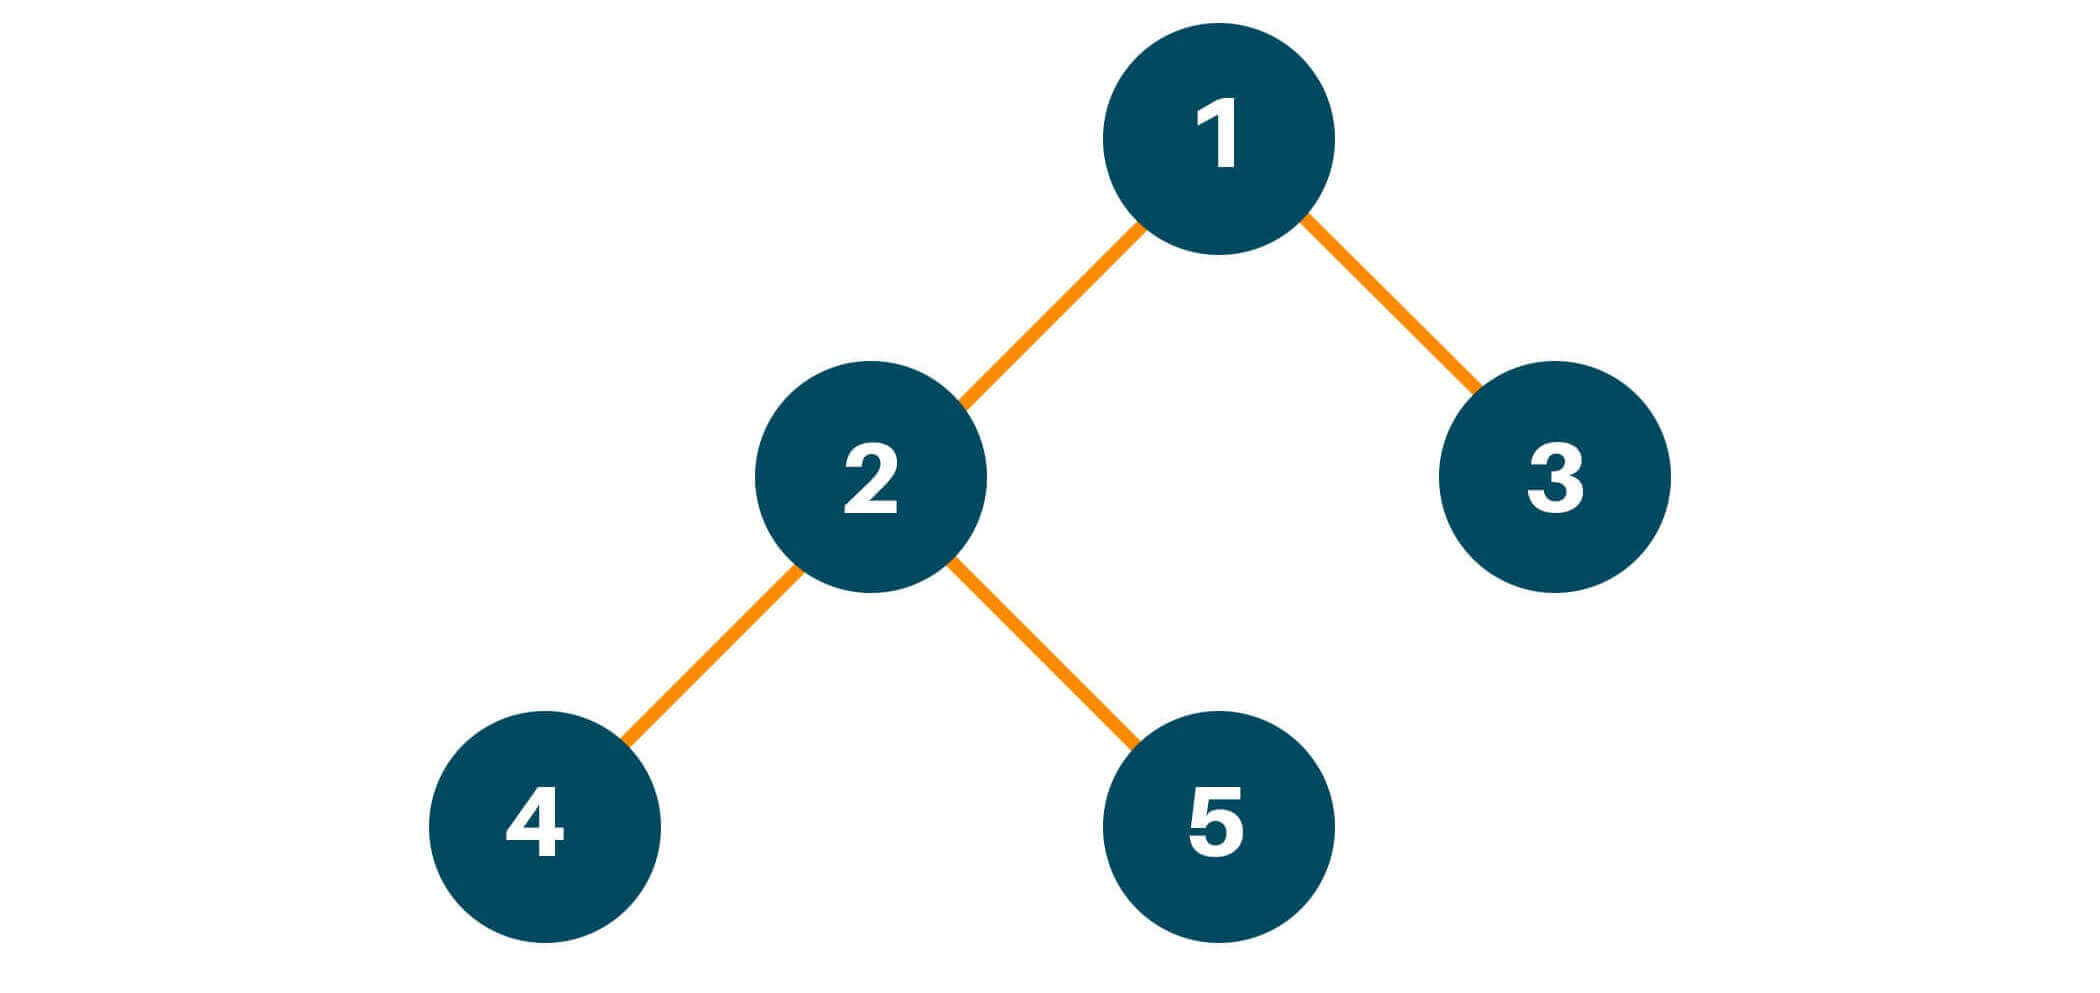 height of a binary tree is 3